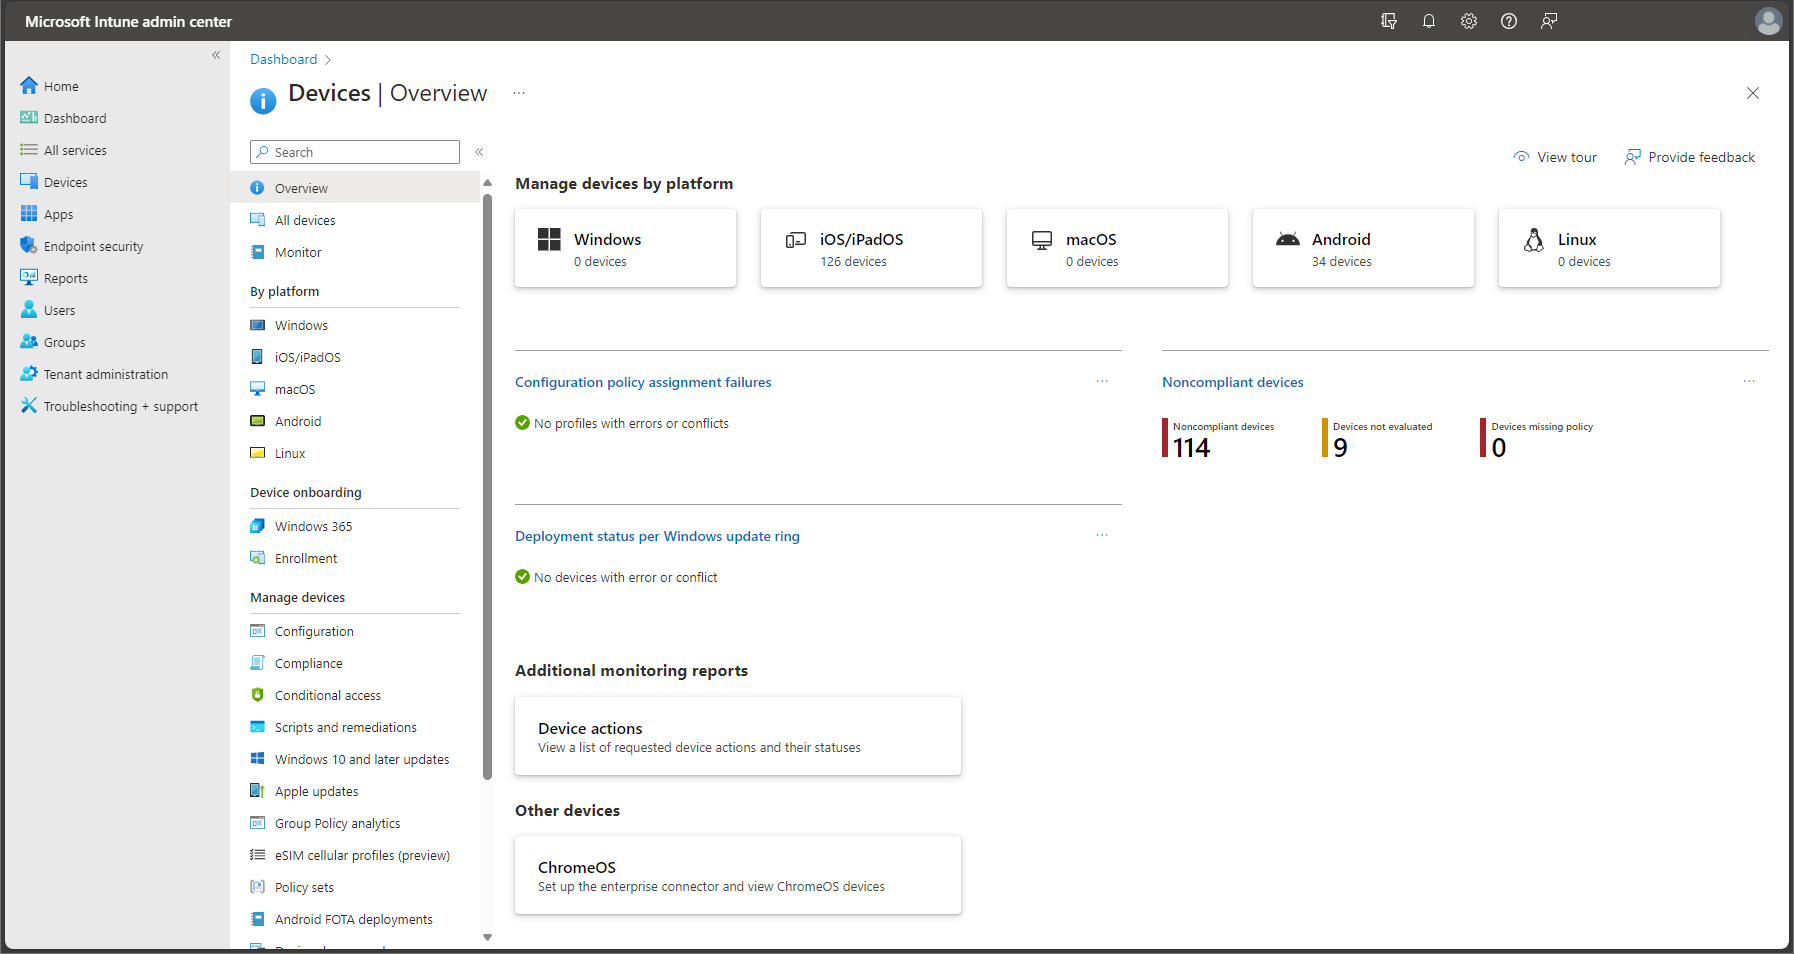 Screenshot of the Microsoft Endpoint Manager admin center - Devices